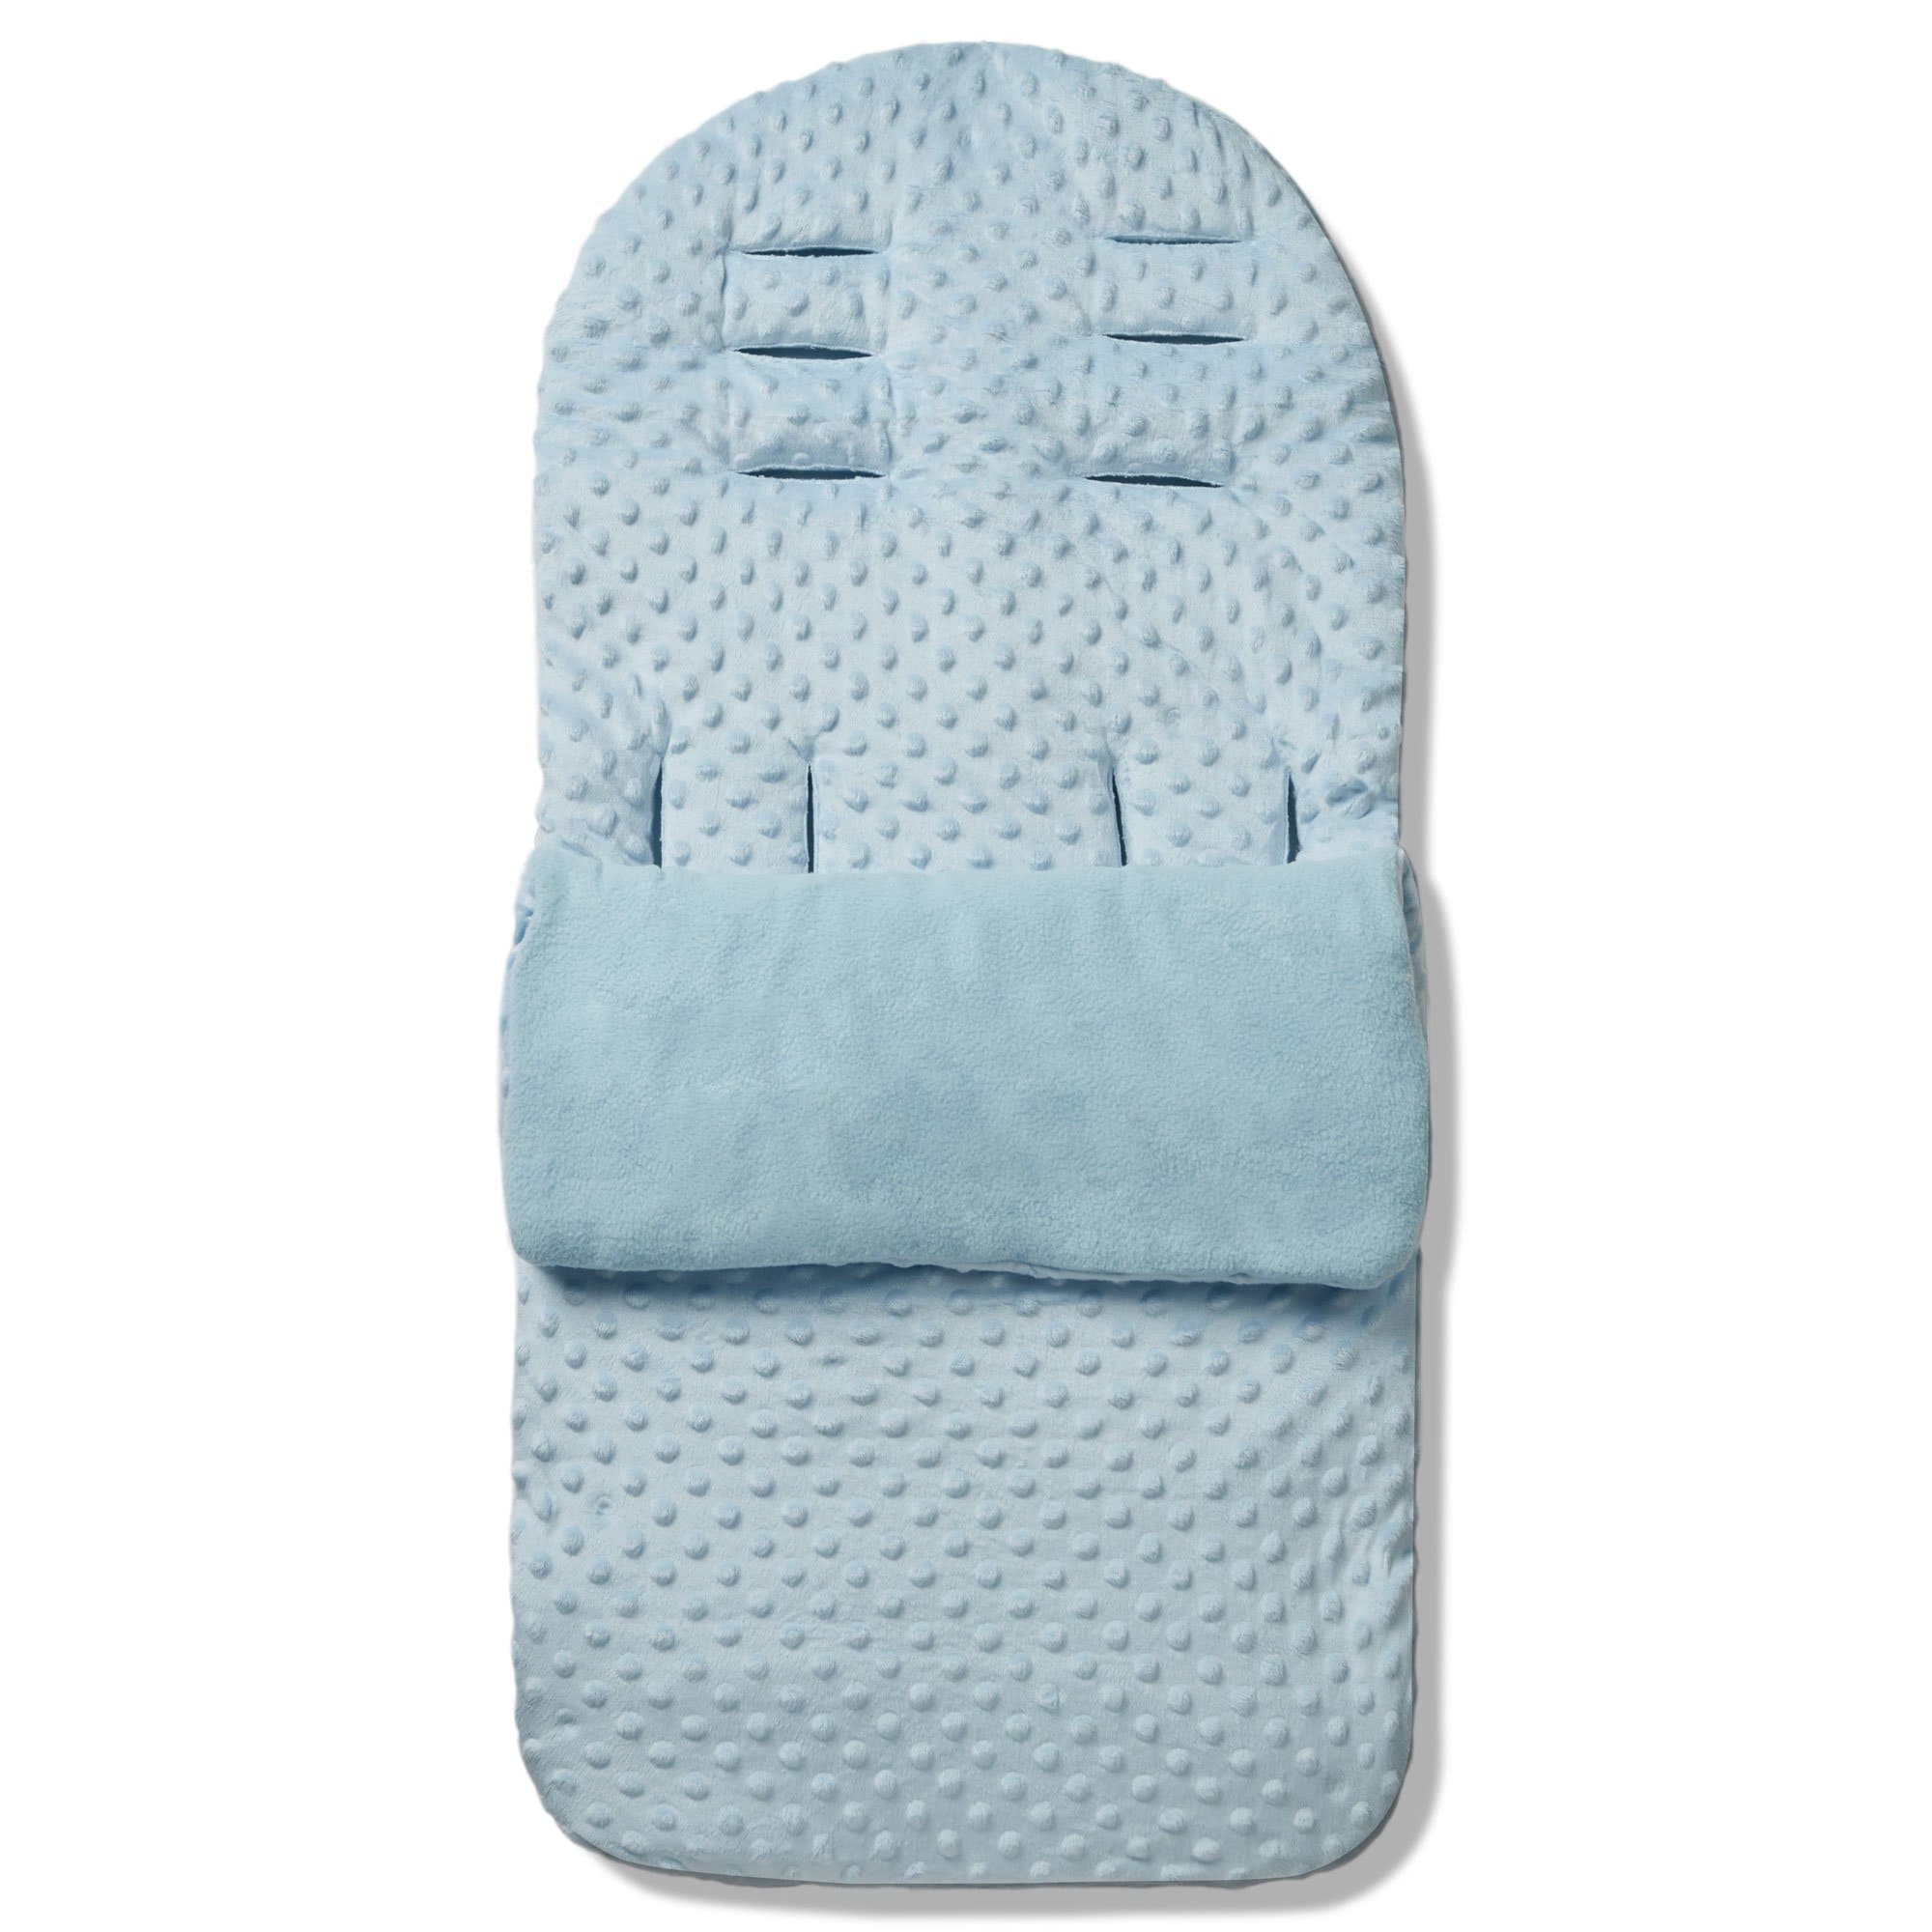 Dimple Footmuff / Cosy Toes Compatible with ABC Design - Blue / Fits All Models | For Your Little One